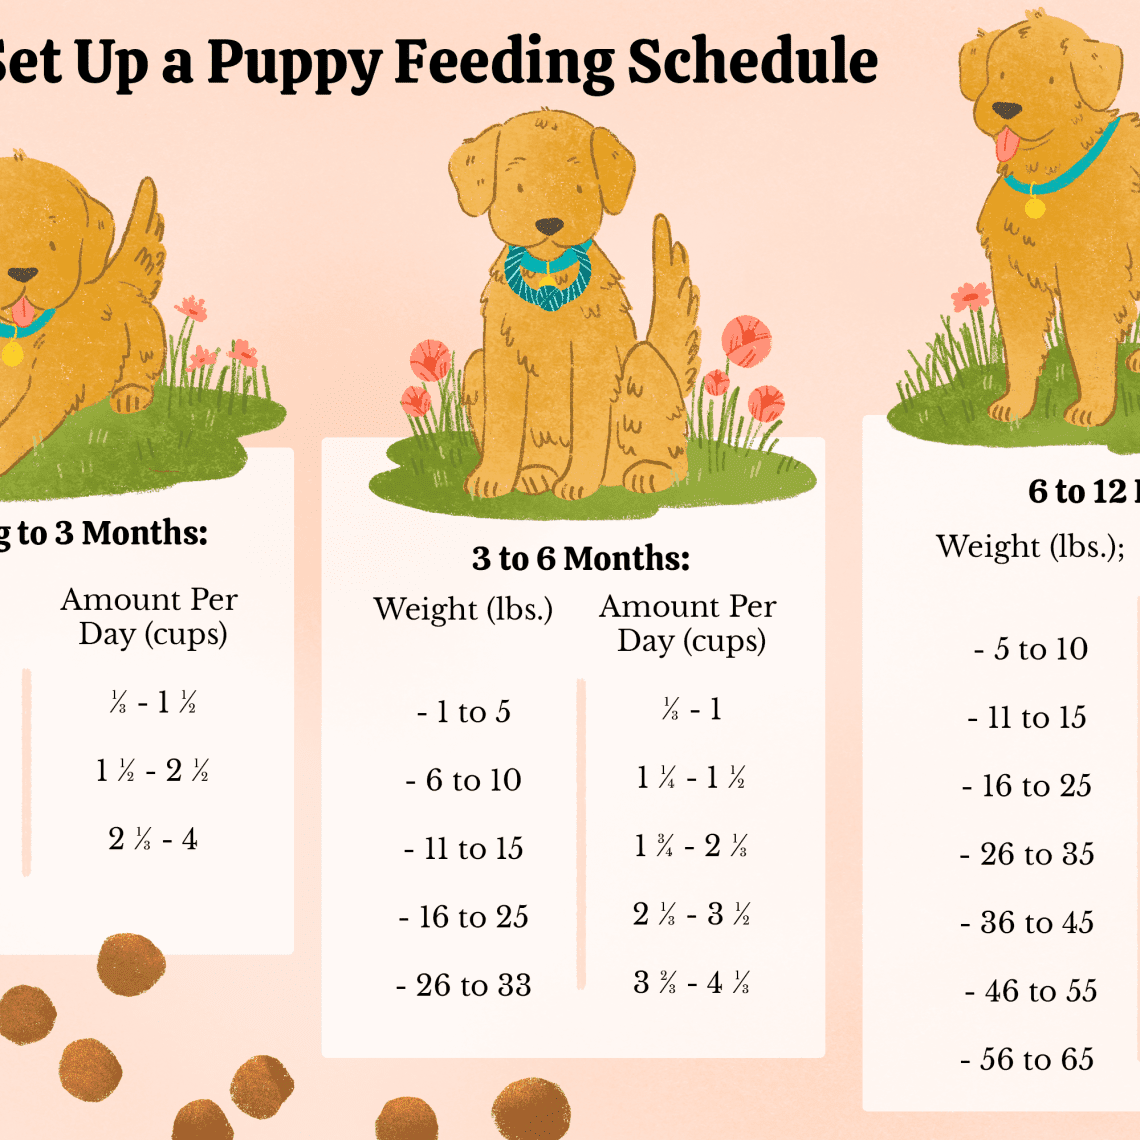 Feeding a puppy from 1 month